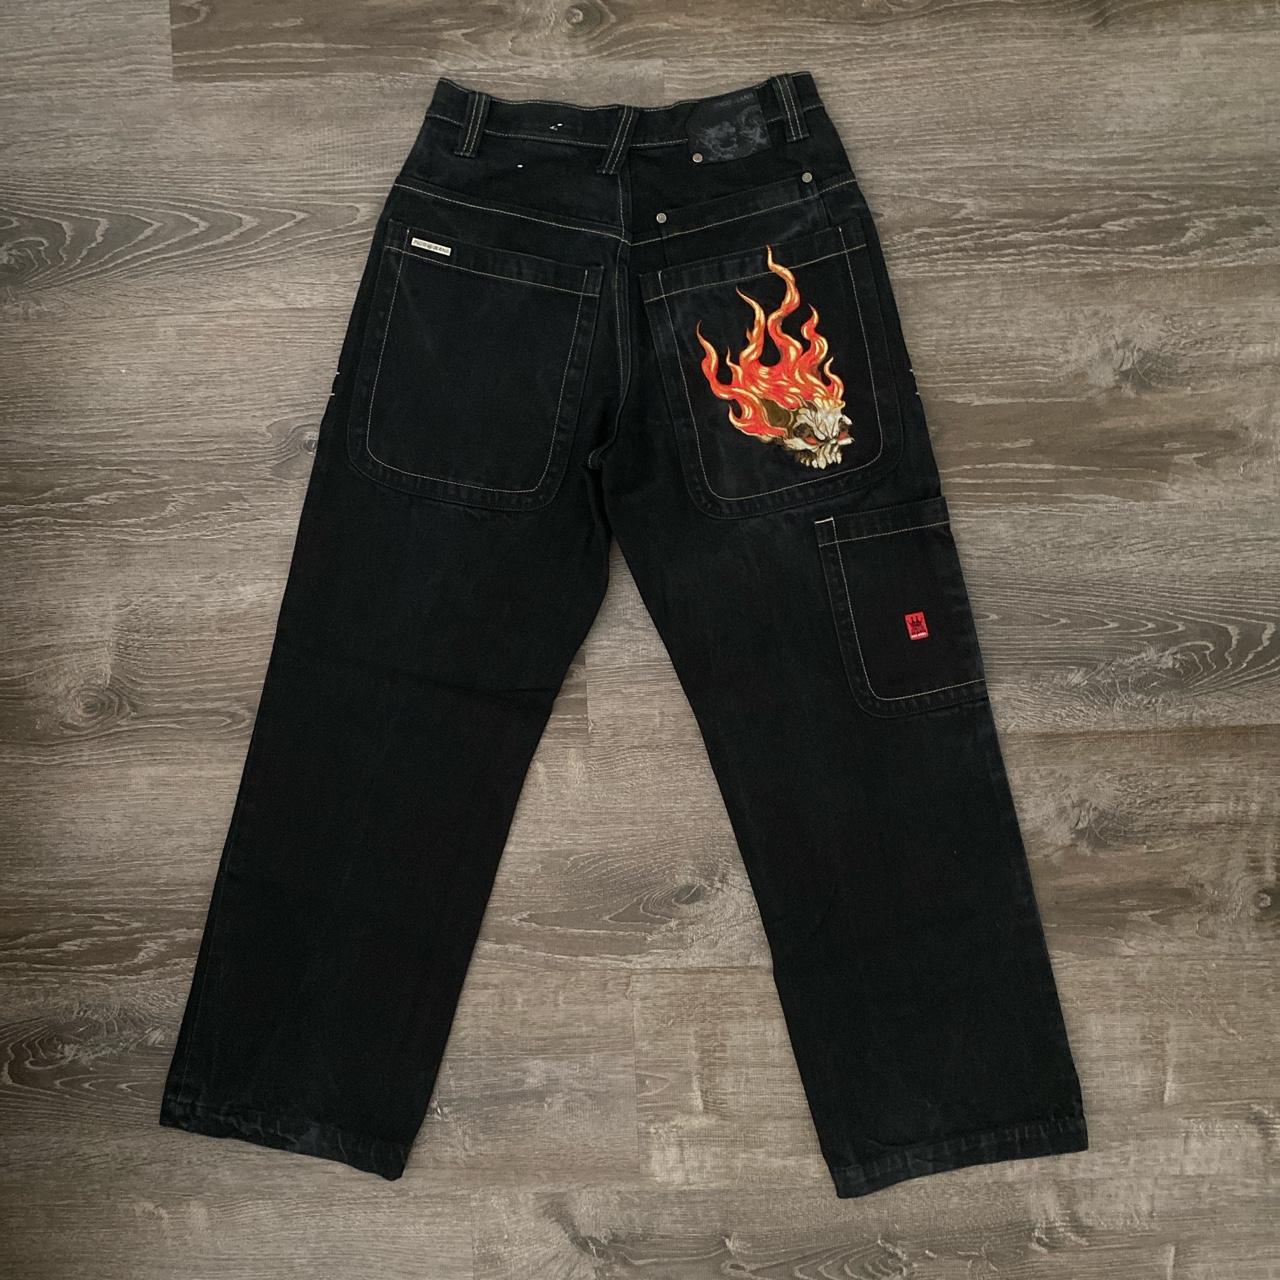 JNCO jeans embroidered fire skull Wide leg jnco... - Depop